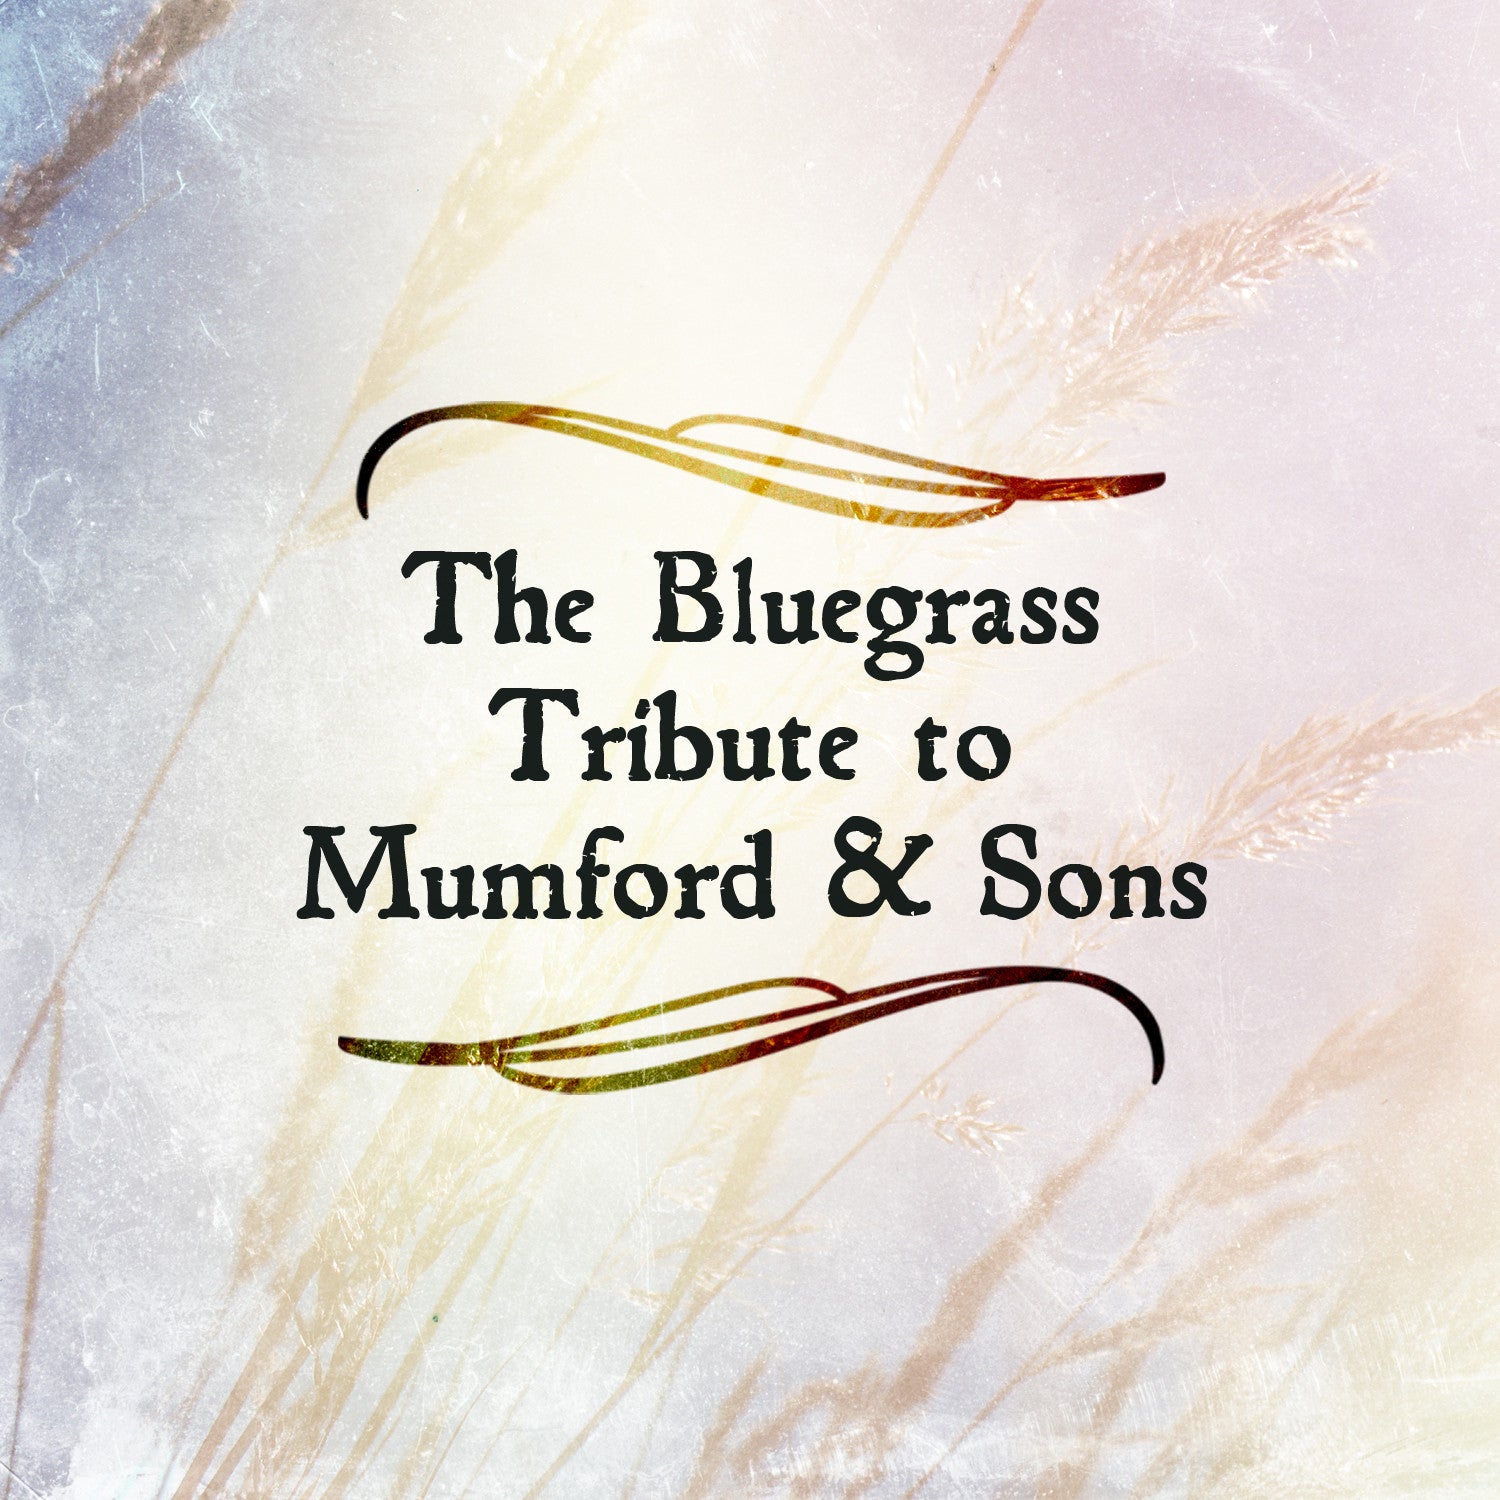 The Bluegrass Tribute to Mumford & Sons